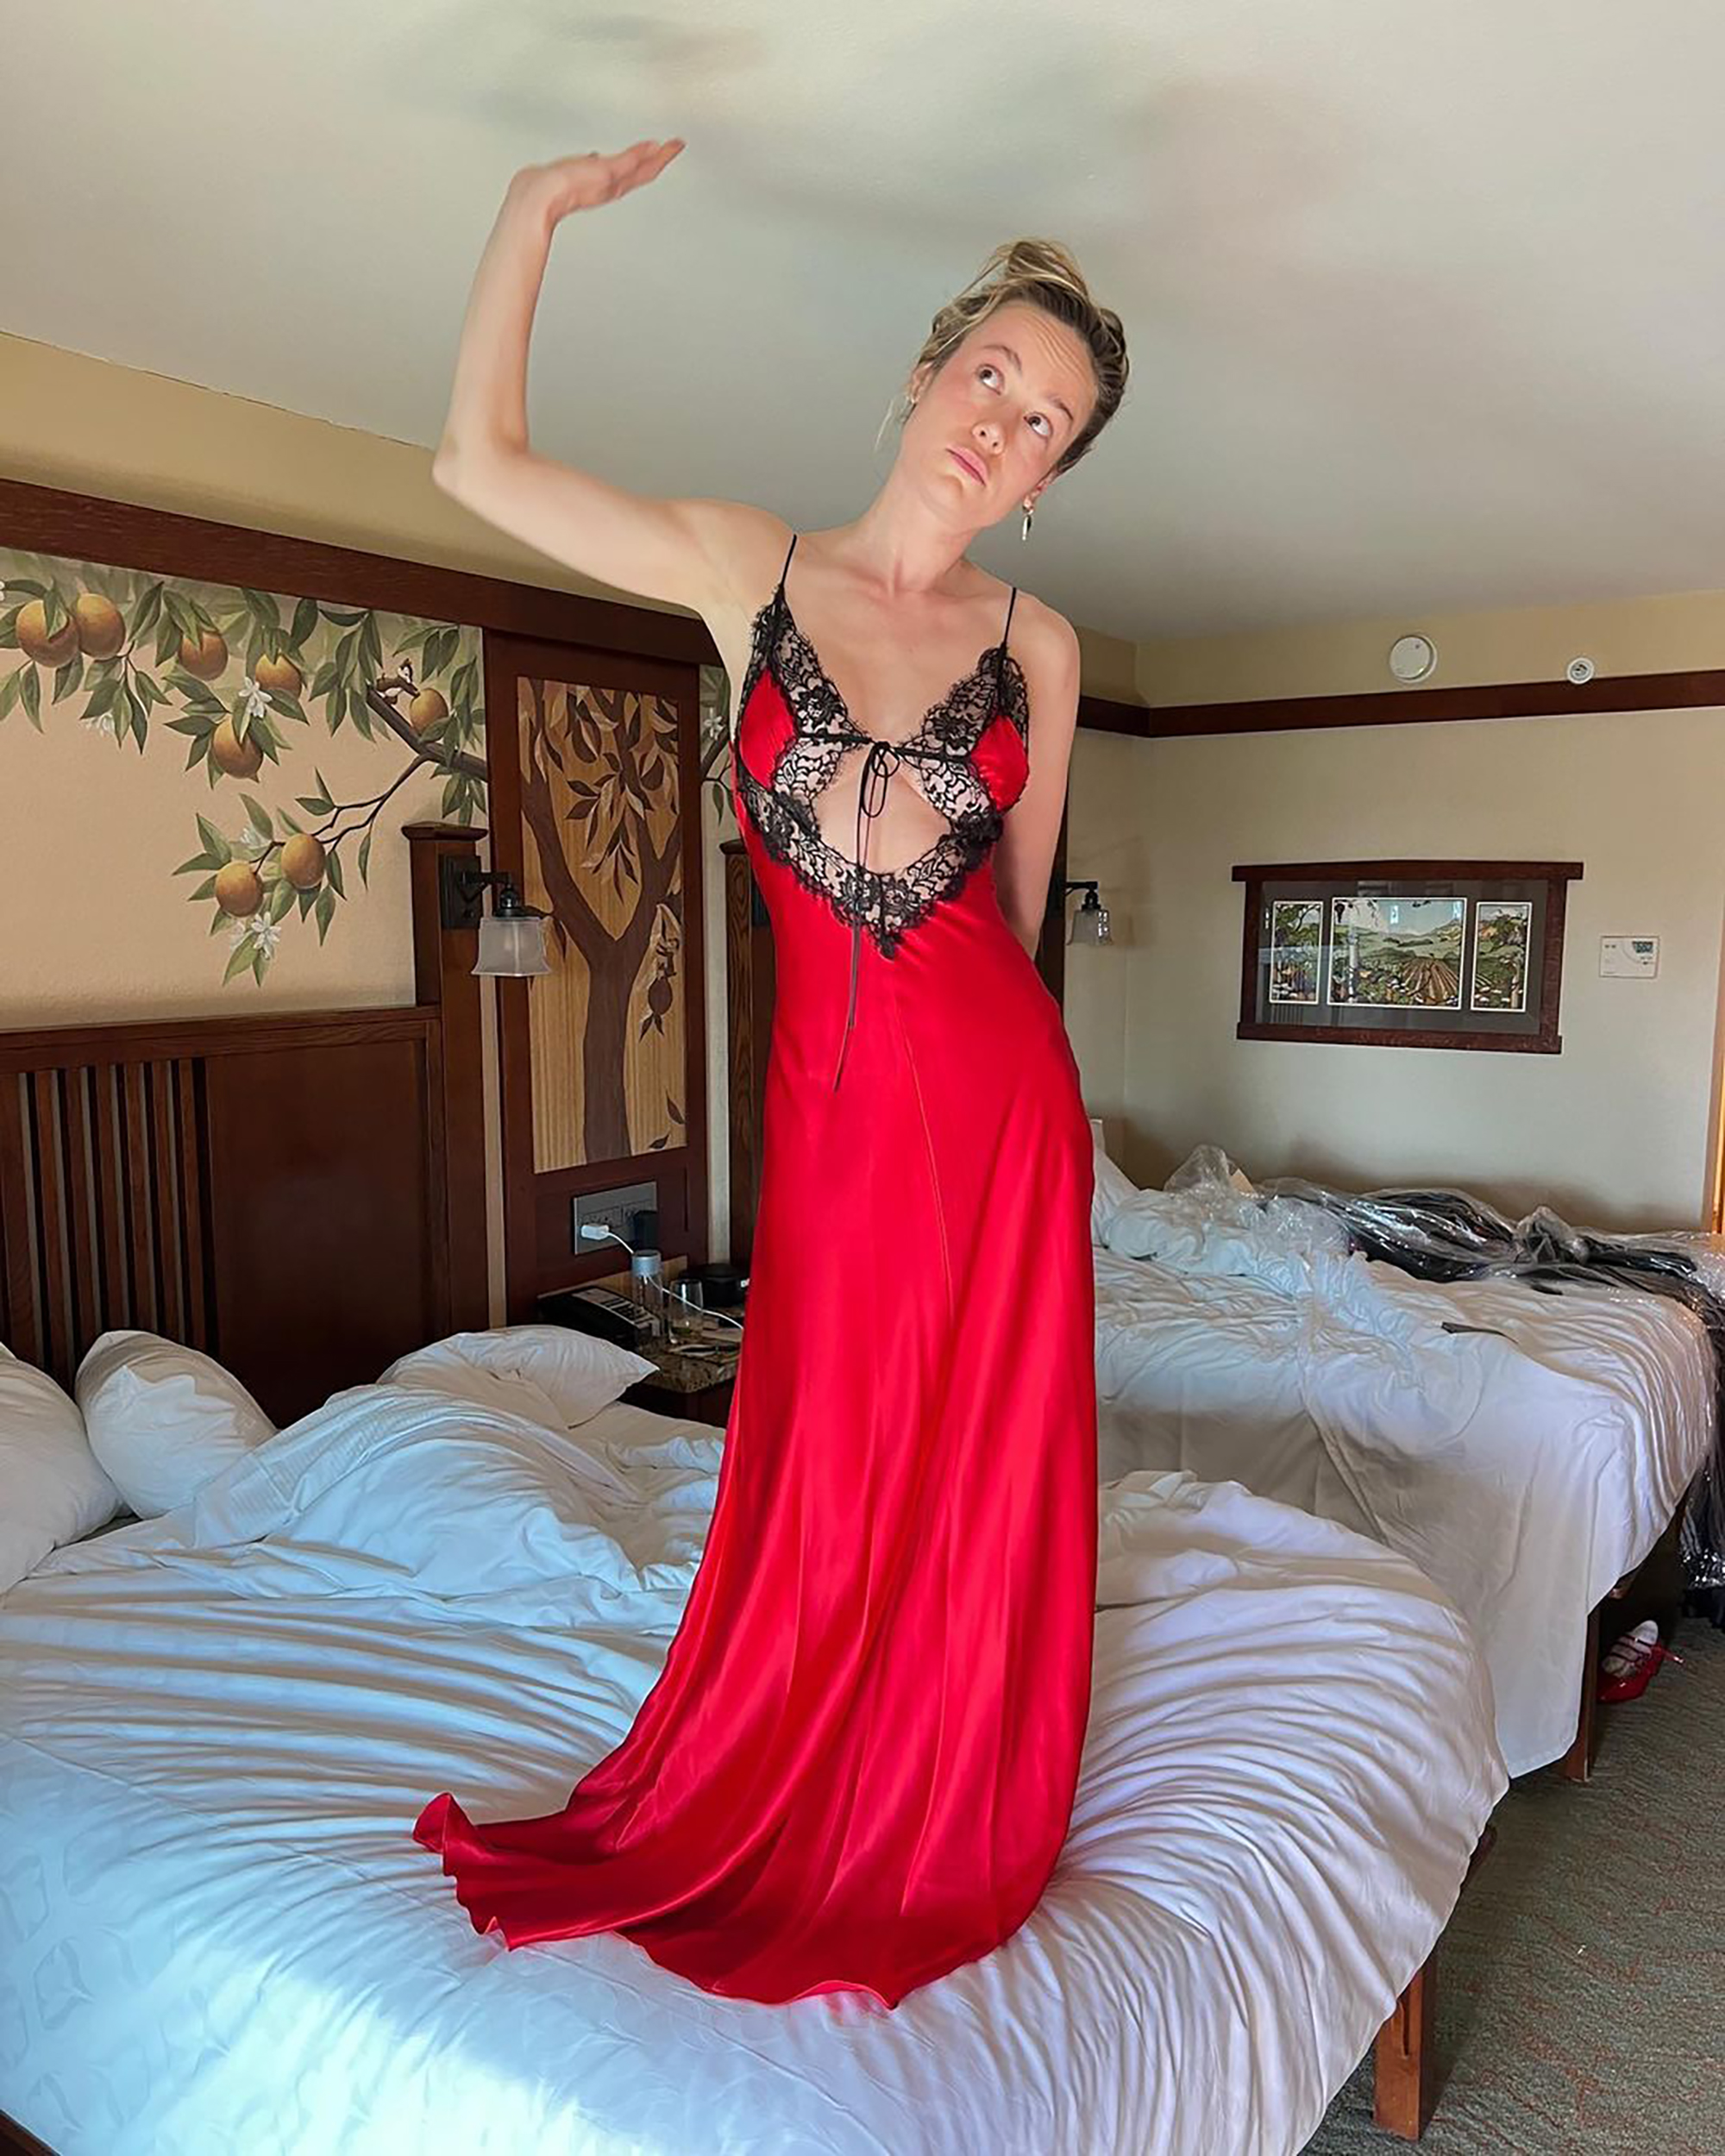 Brie Larson shared a makeup-free snap in a sultry crimson slip dress while on vacation